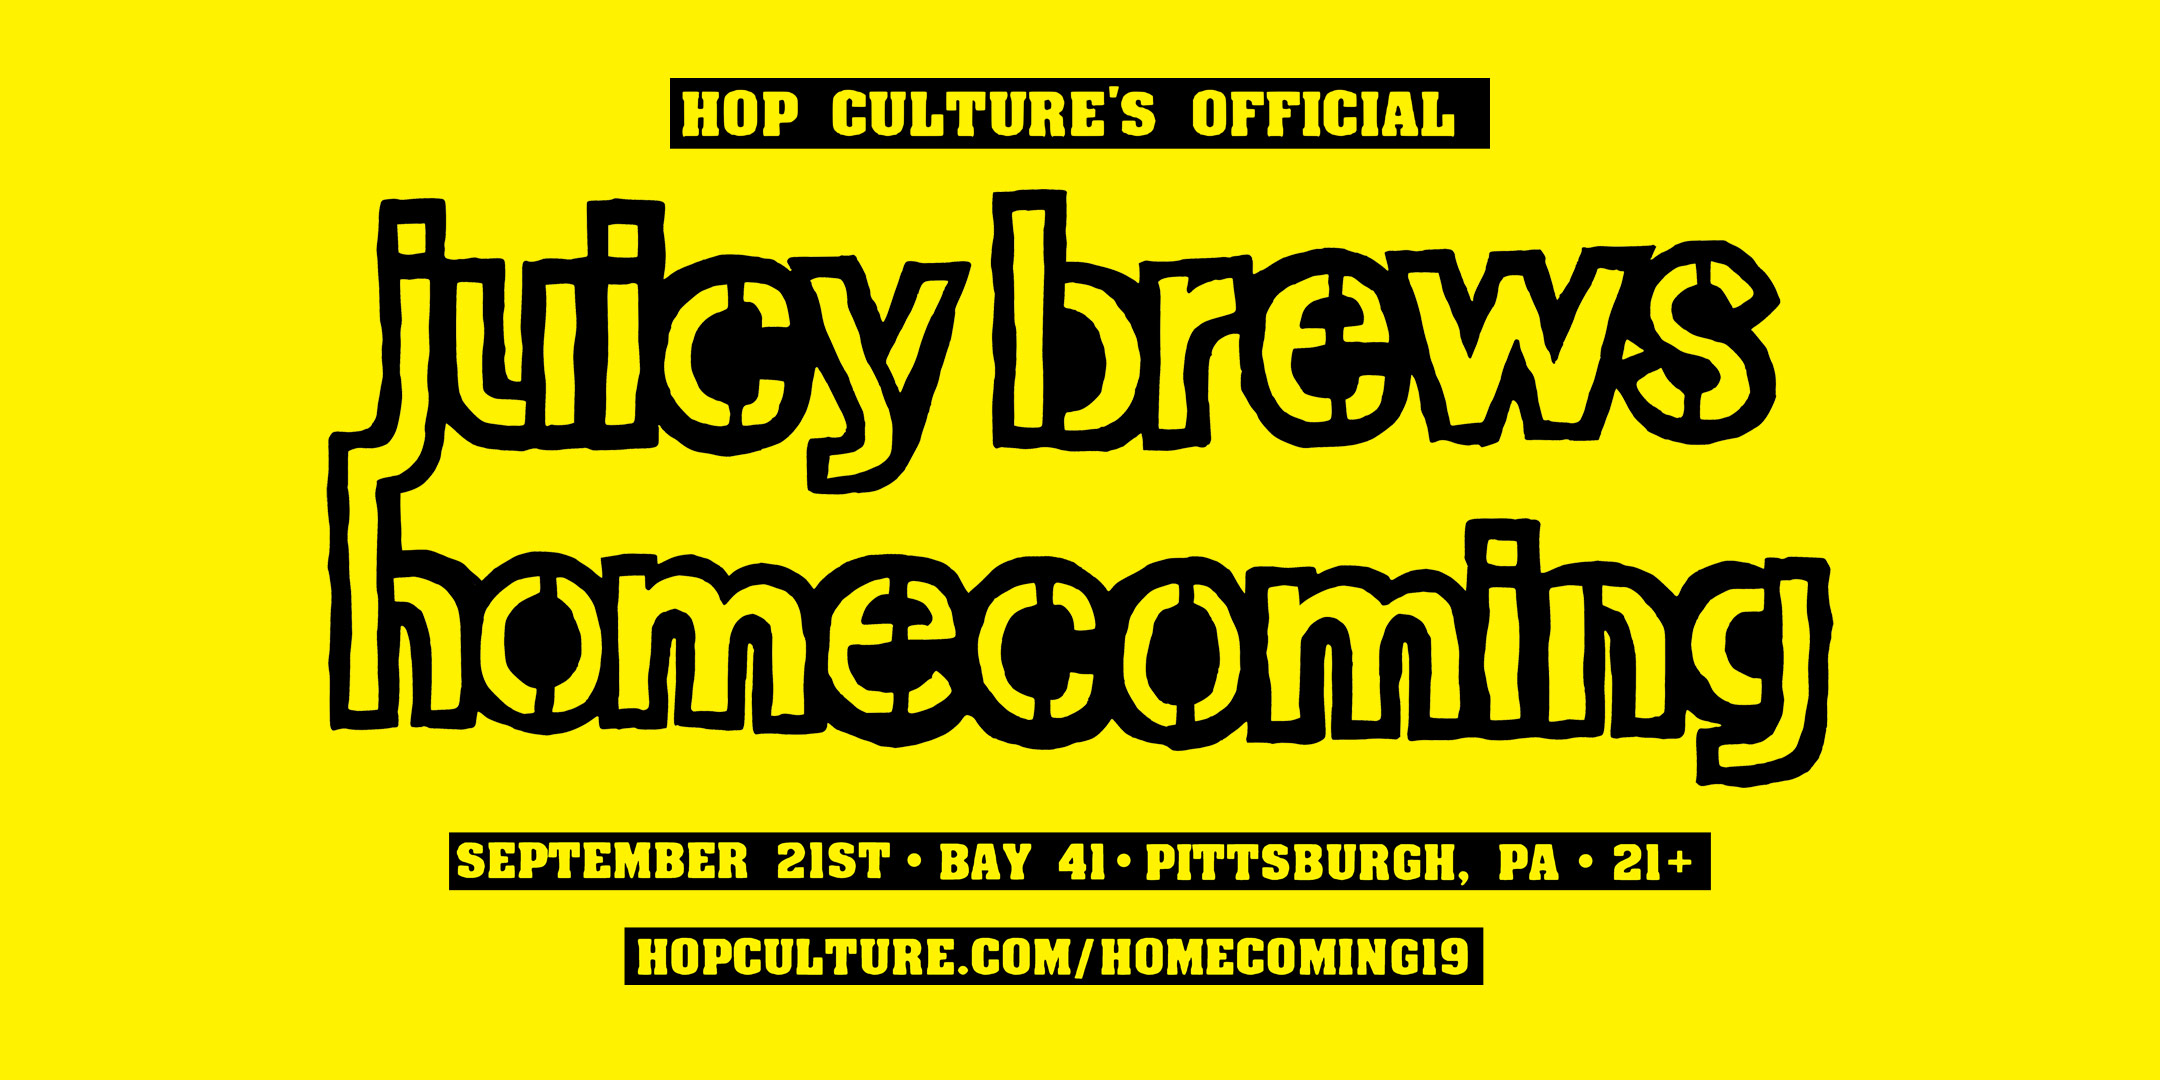 Here’s What to Drink at Juicy Brews Homecoming